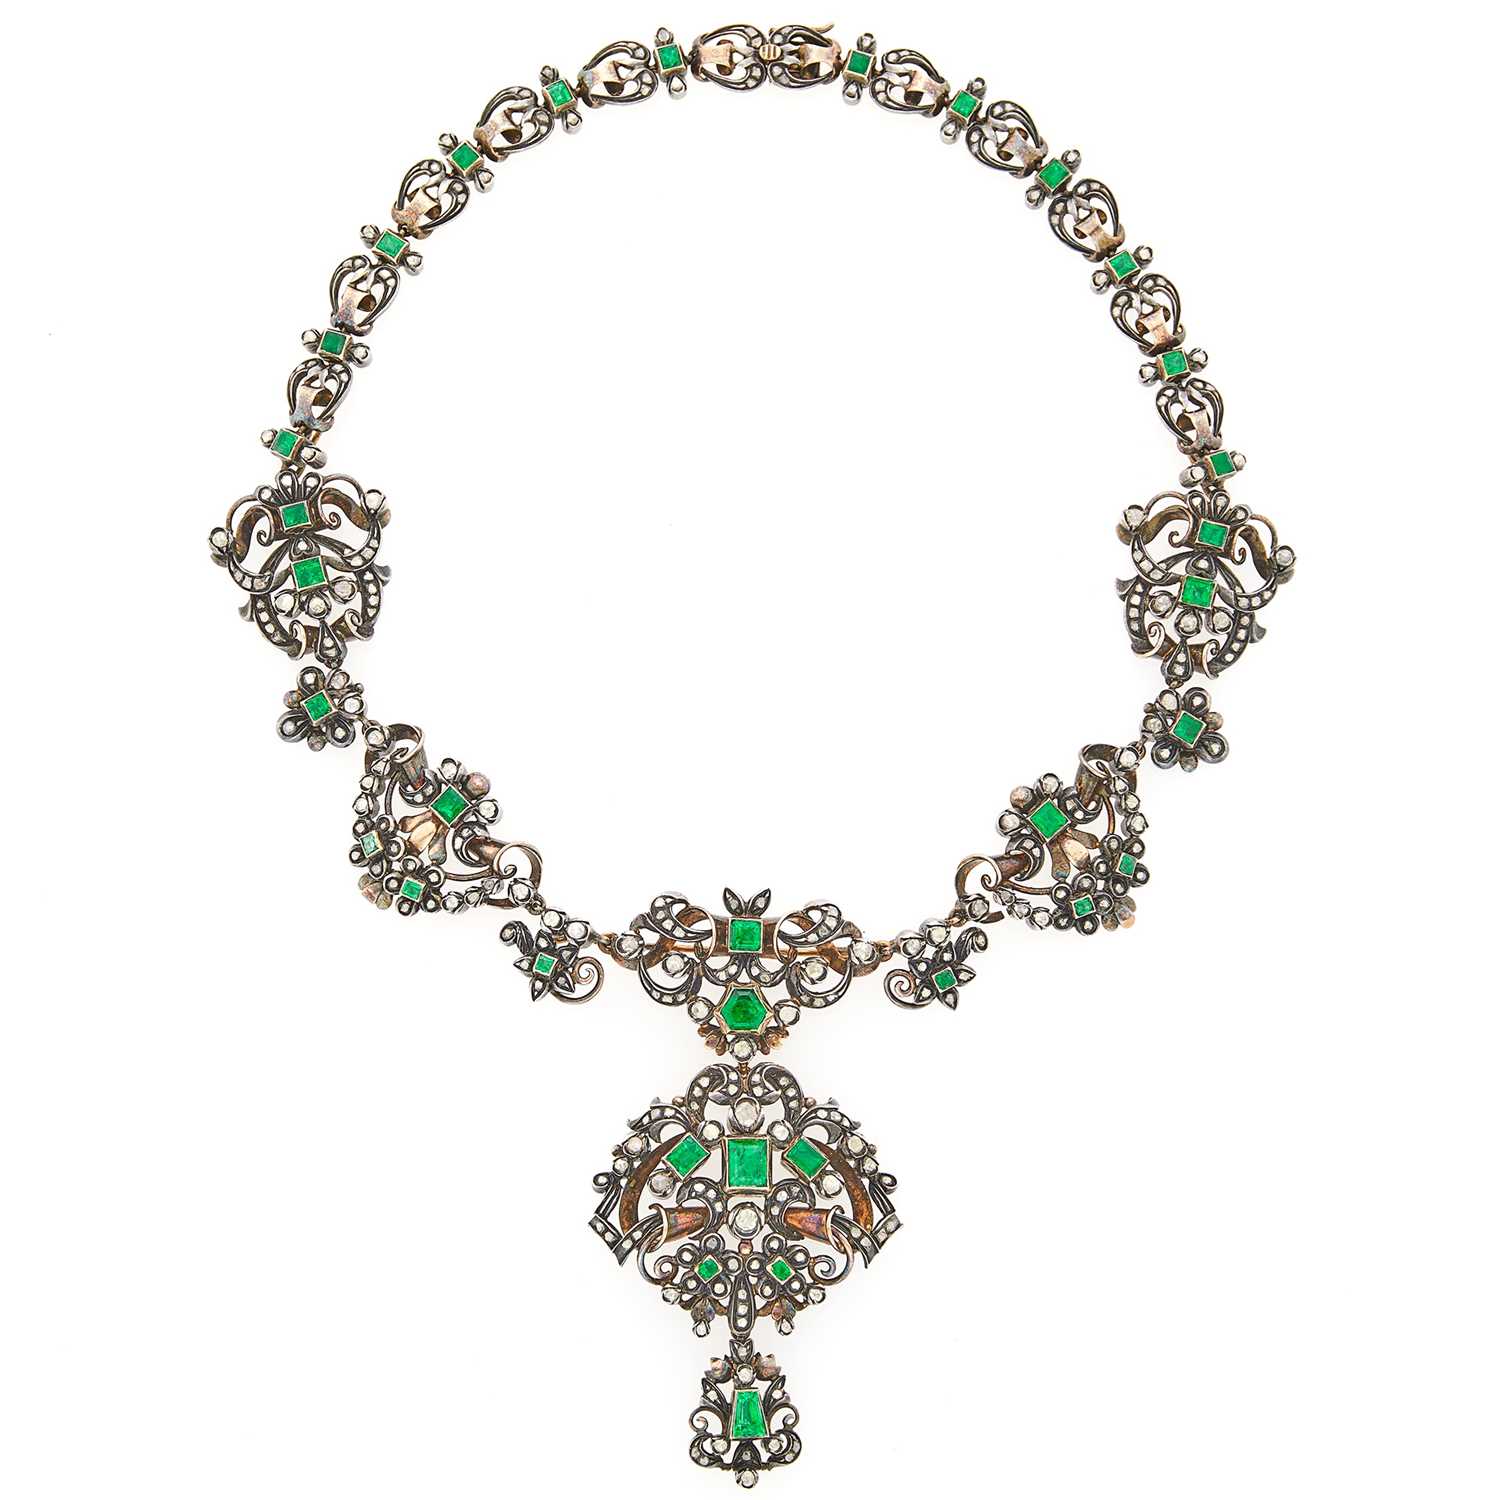 Lot 2152 - Gold, Silver, Emerald and Diamond Pendant-Brooch Necklace